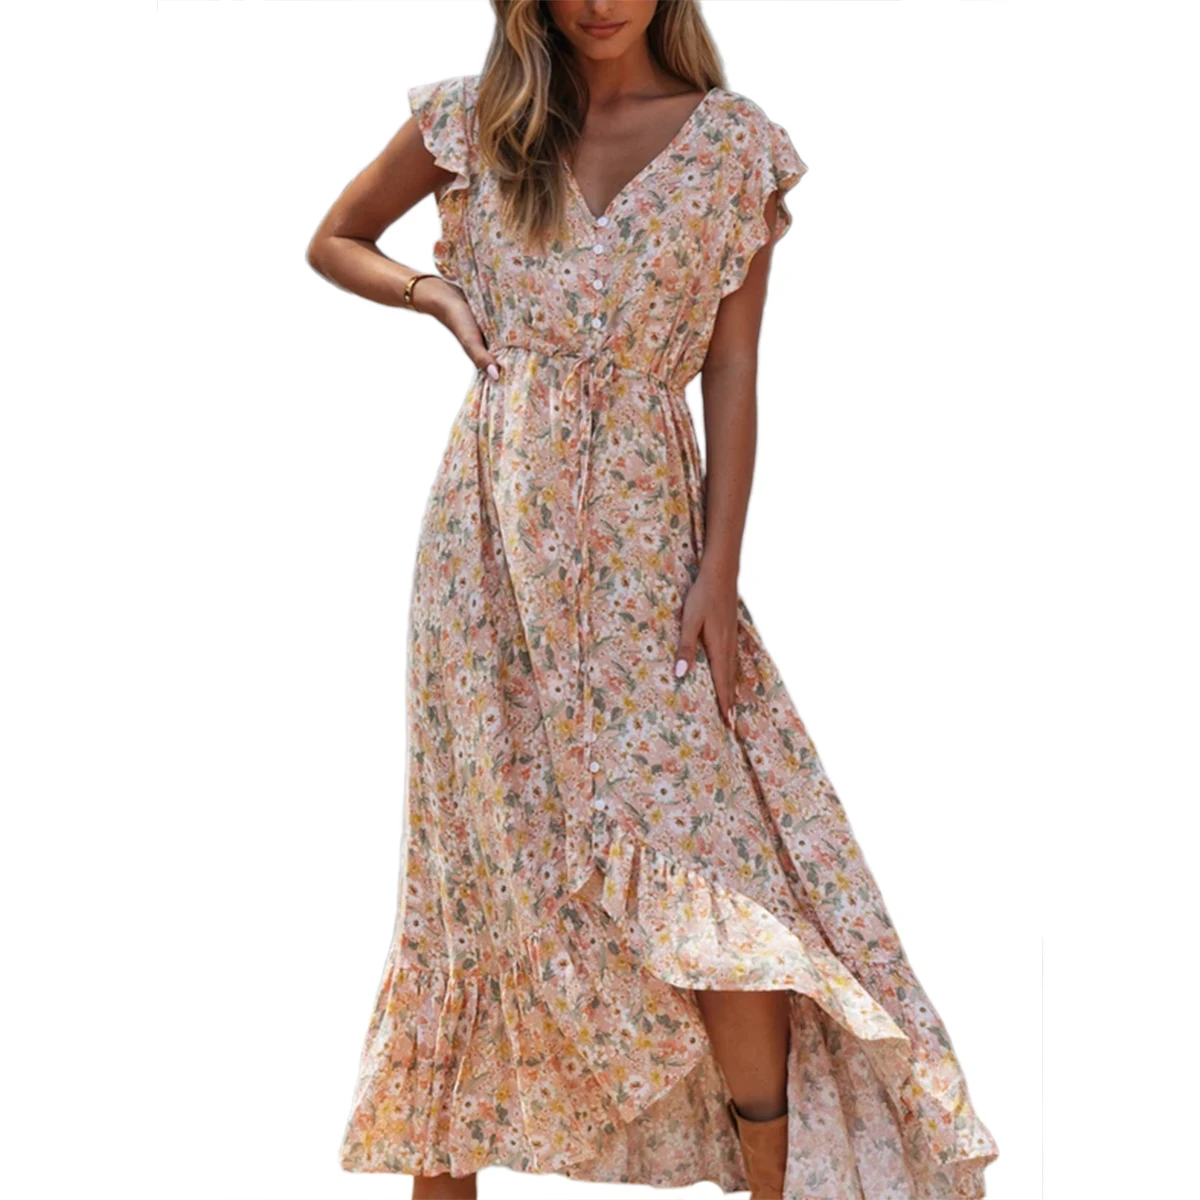 

Floral Print Long Dress Boho Summer Vestidos Buttons Sashes Ladies Gypsy Maxi Dresses Casual Female 2020 Spring Summer New